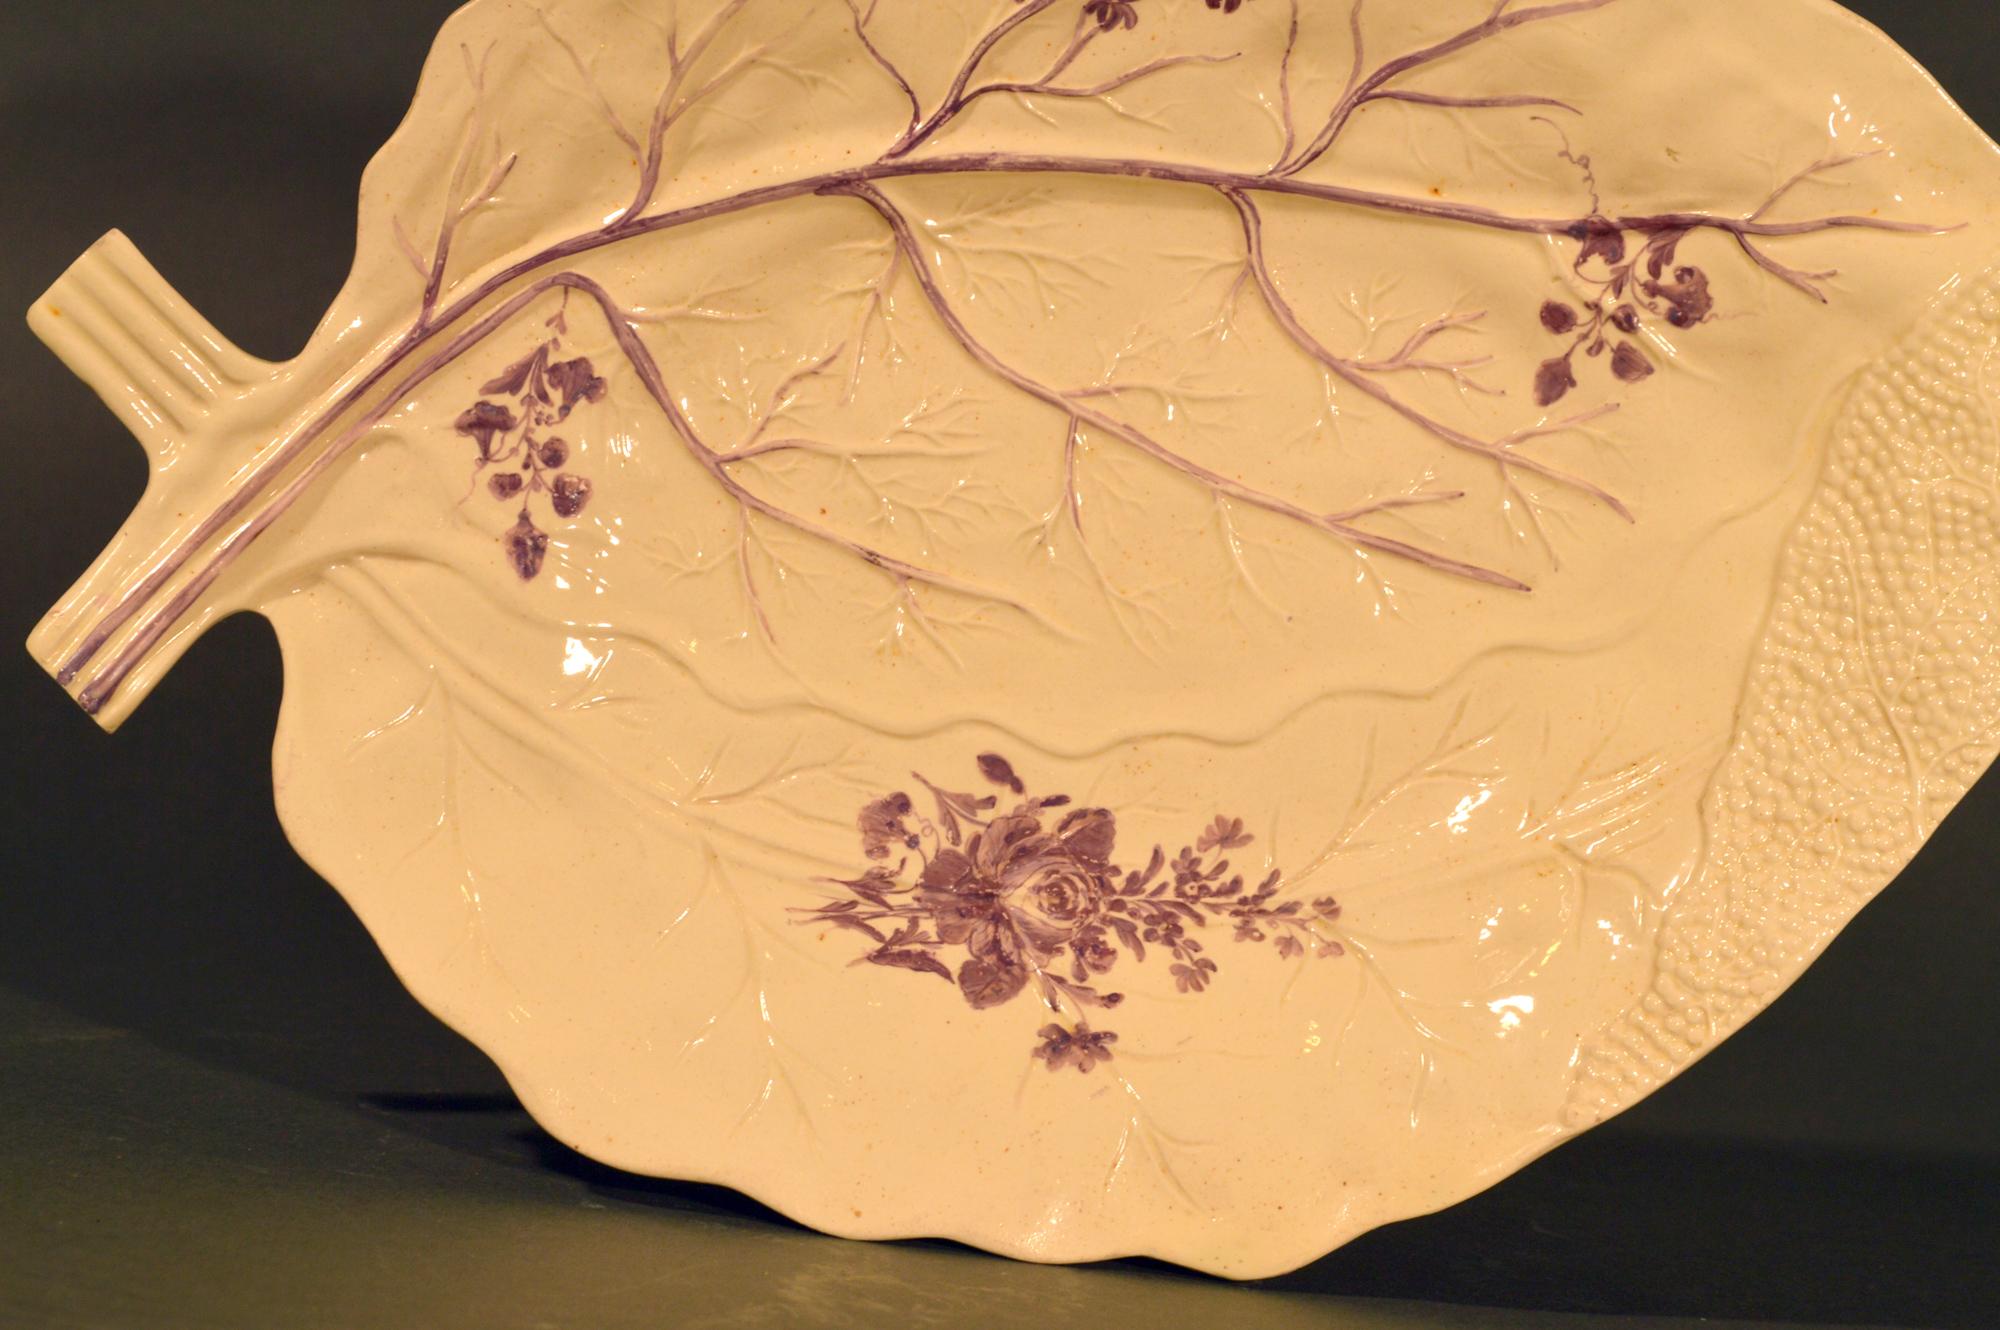 Derbyshire Creamware Leaf Dish,
Circa 1785.

The large Derbyshire creamware dish with a naturalistically molded body in the form of two overlapping leaves with painted puce flowers.

Dimensions: 13 1/4 inches x 9 1/4 inches x 1 1/4 inches